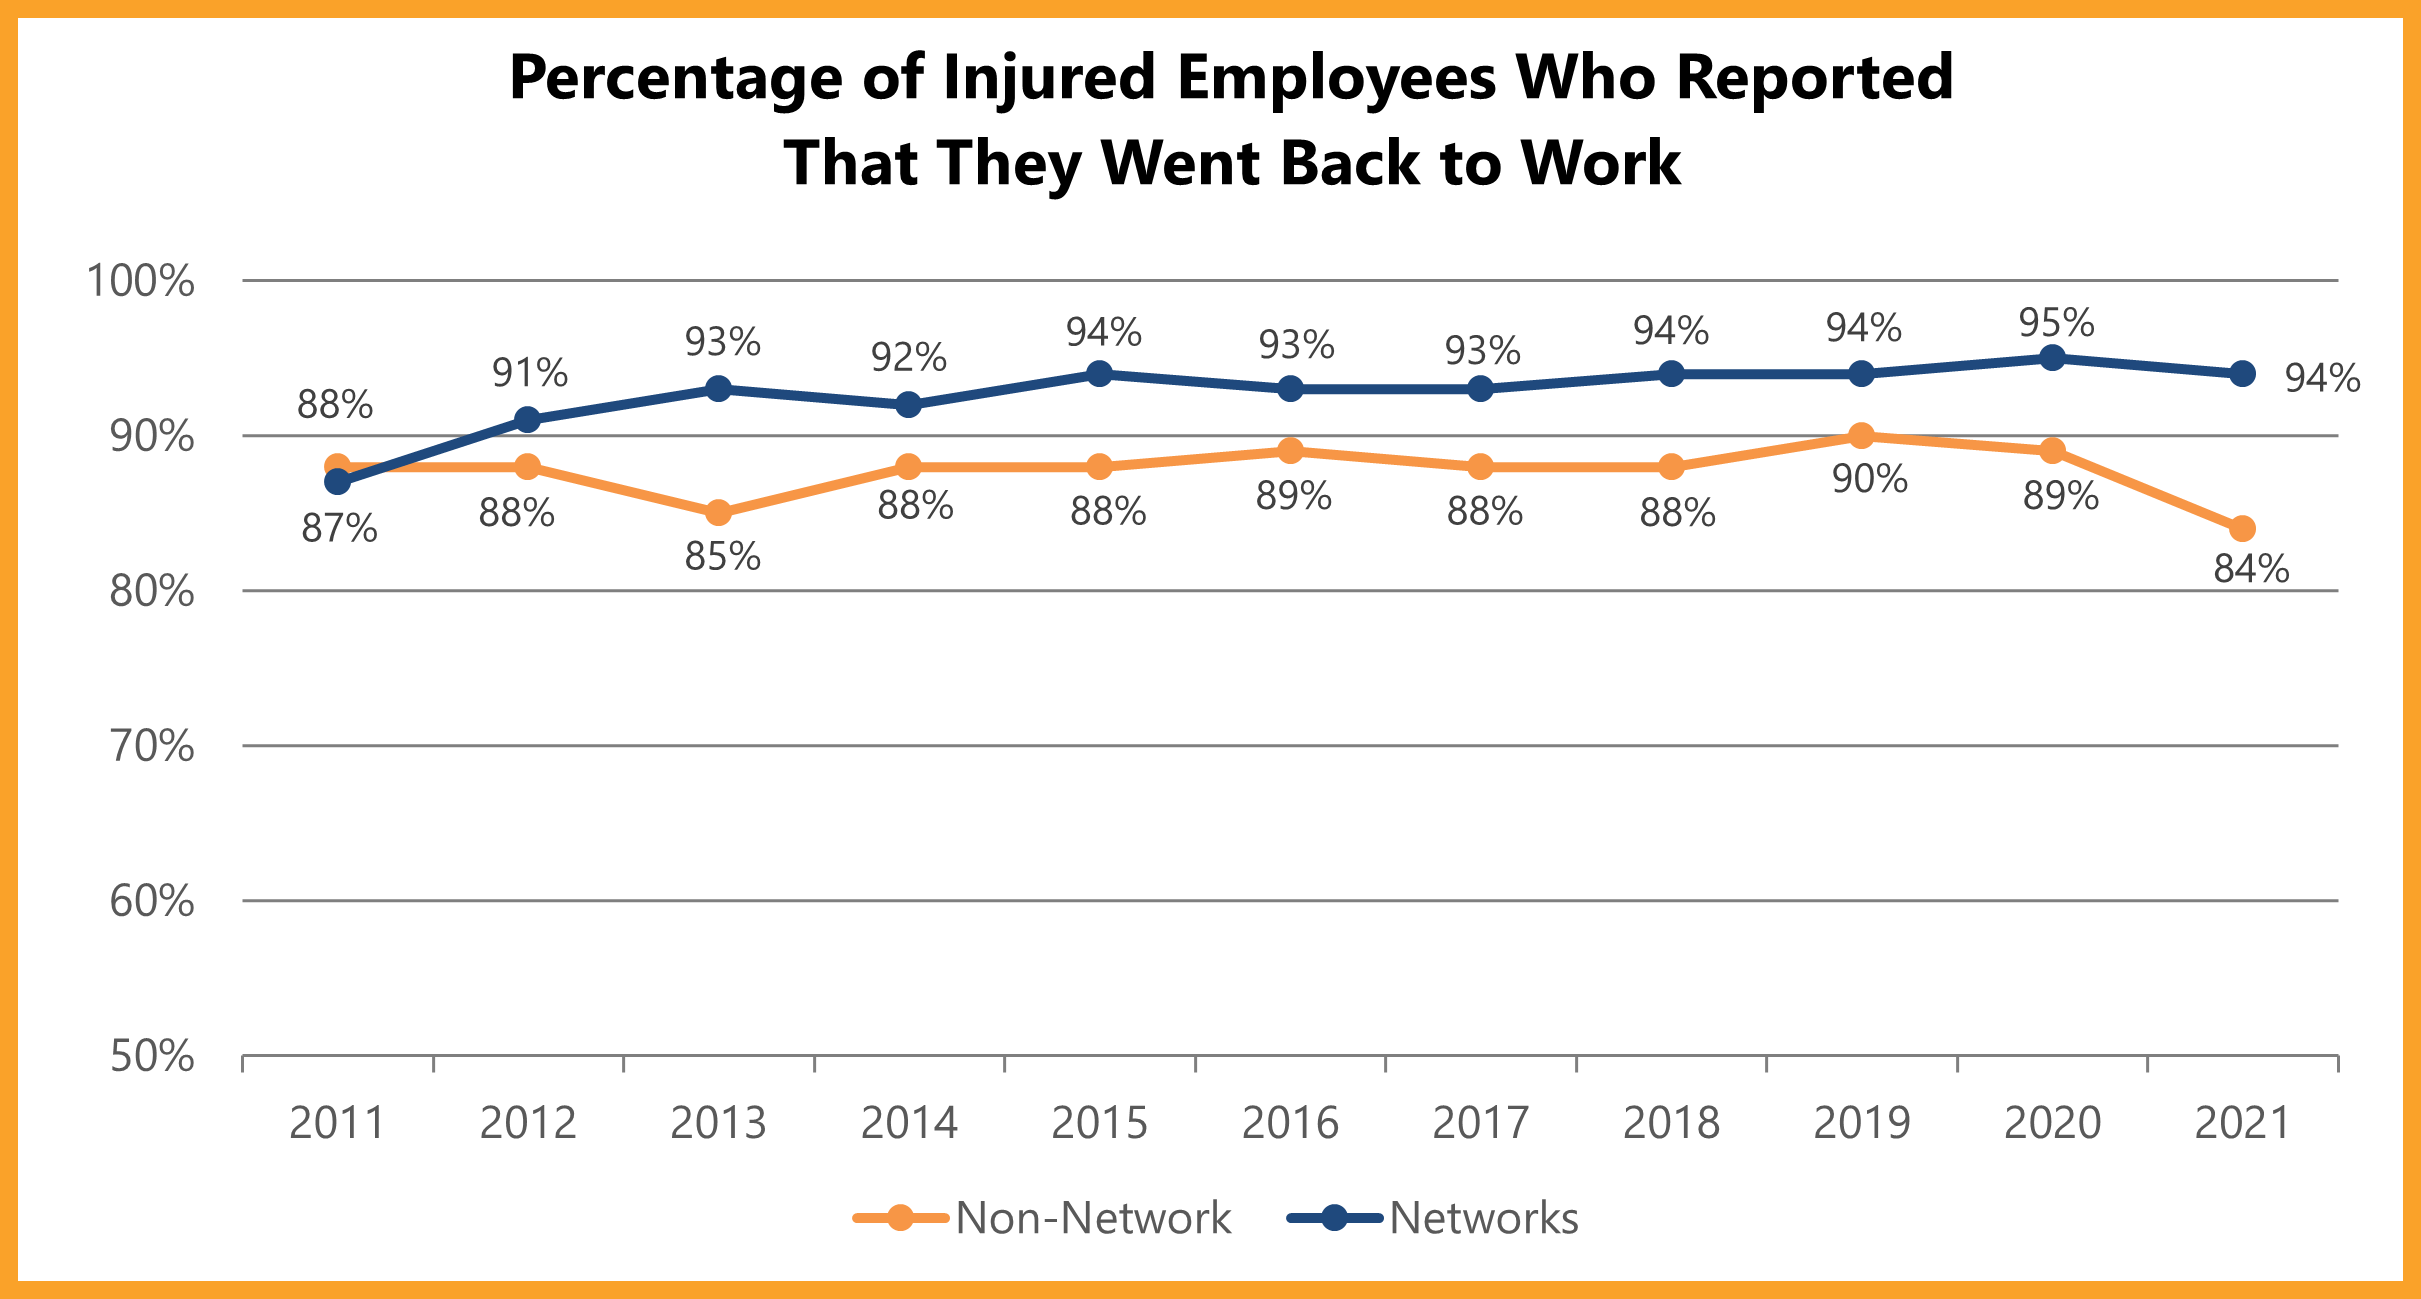 Percentage of Injured Employees Who Reported That They Went Back to Work